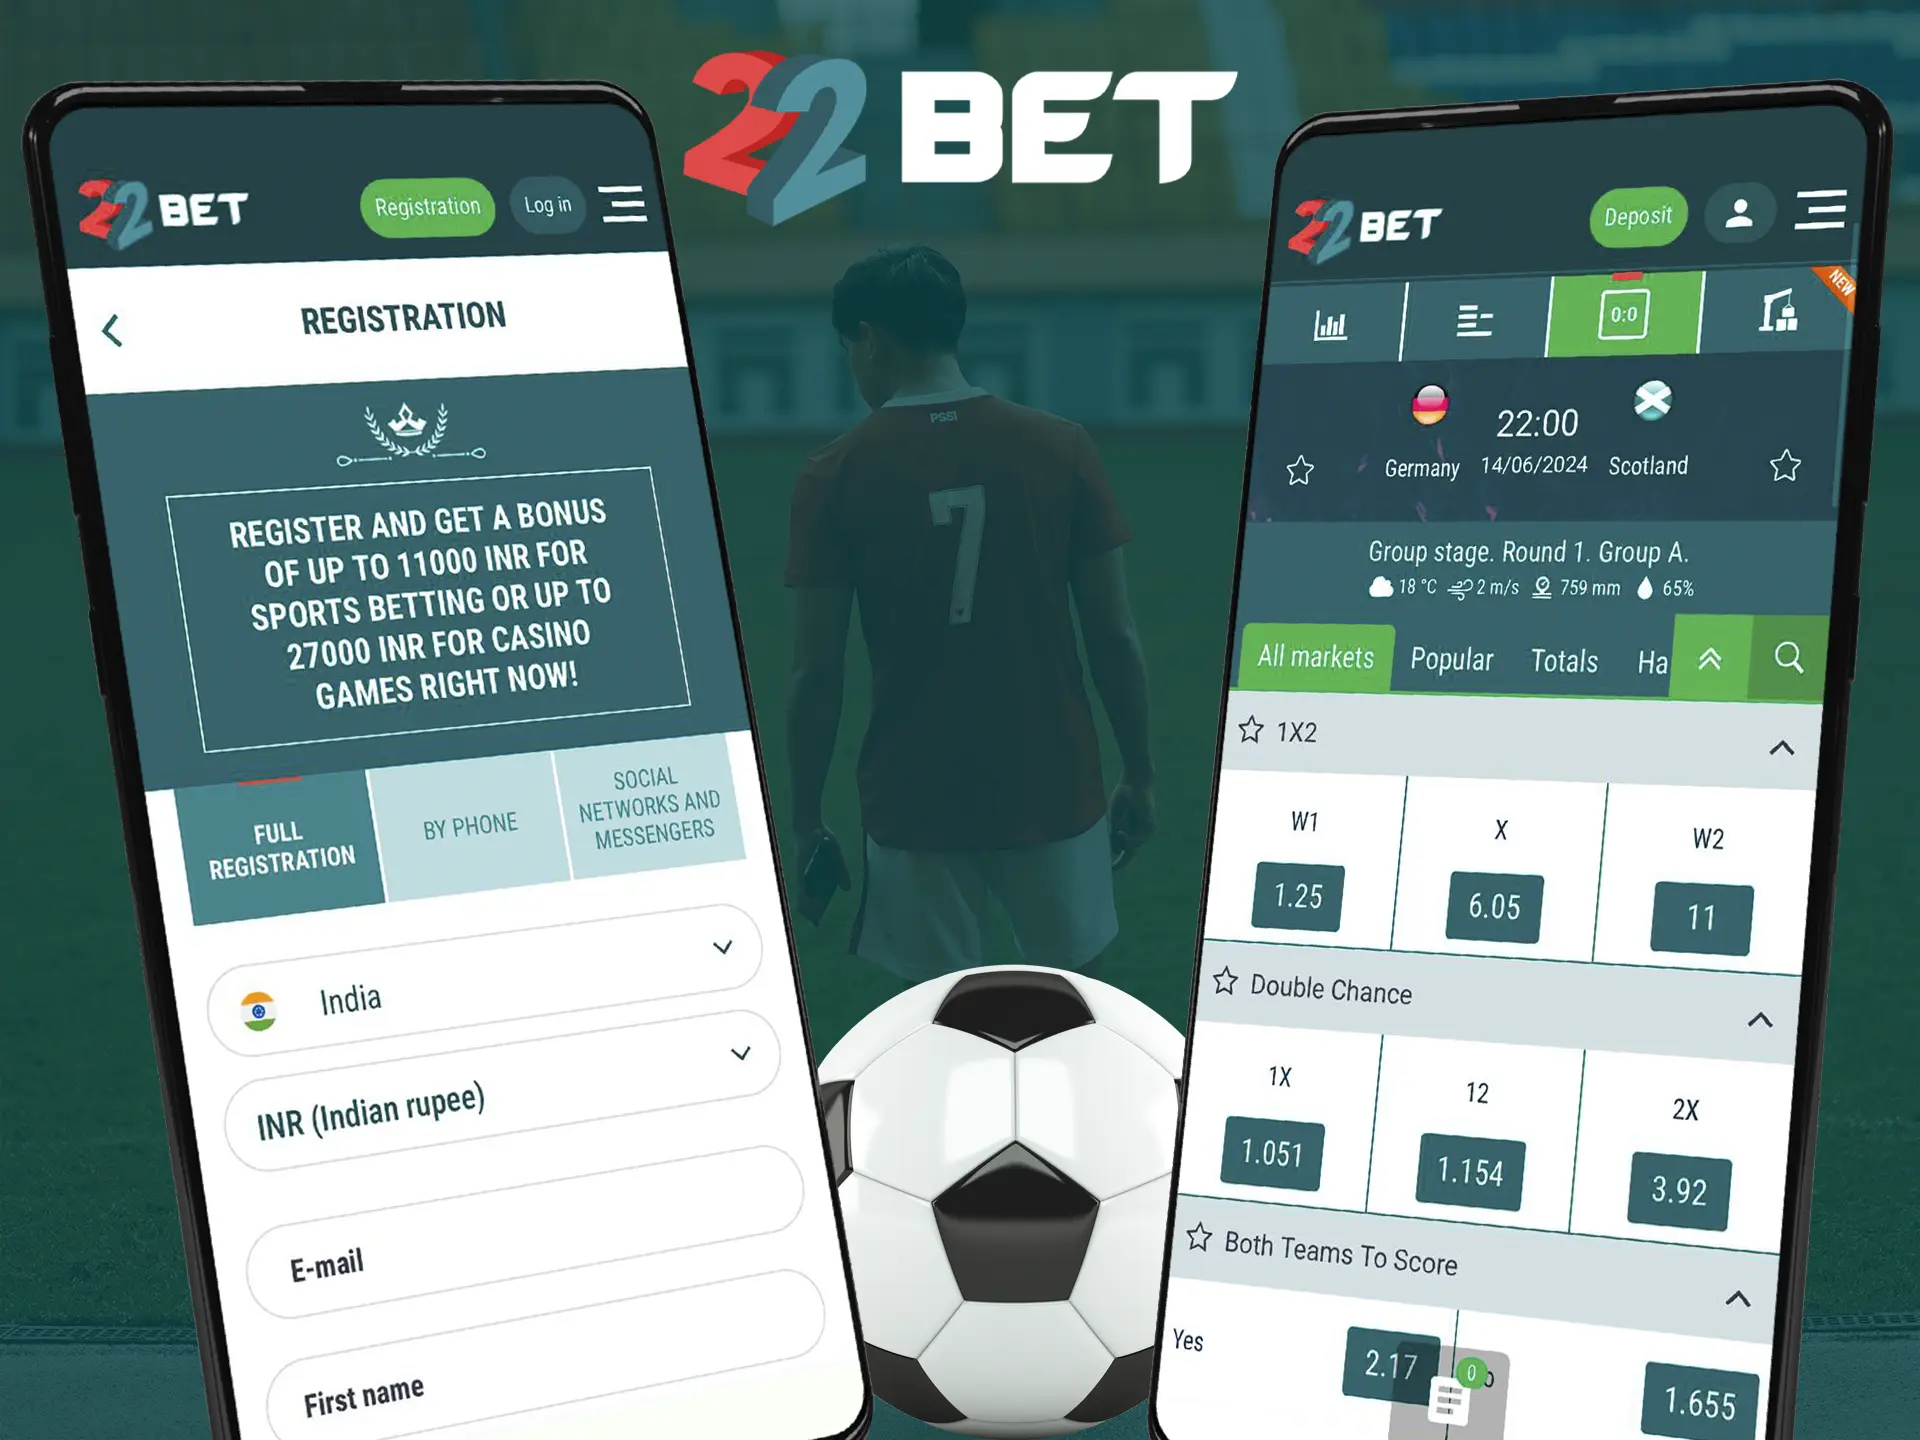 High speed performance and smooth adaptation when watching matches is provided by the 22Bet app.